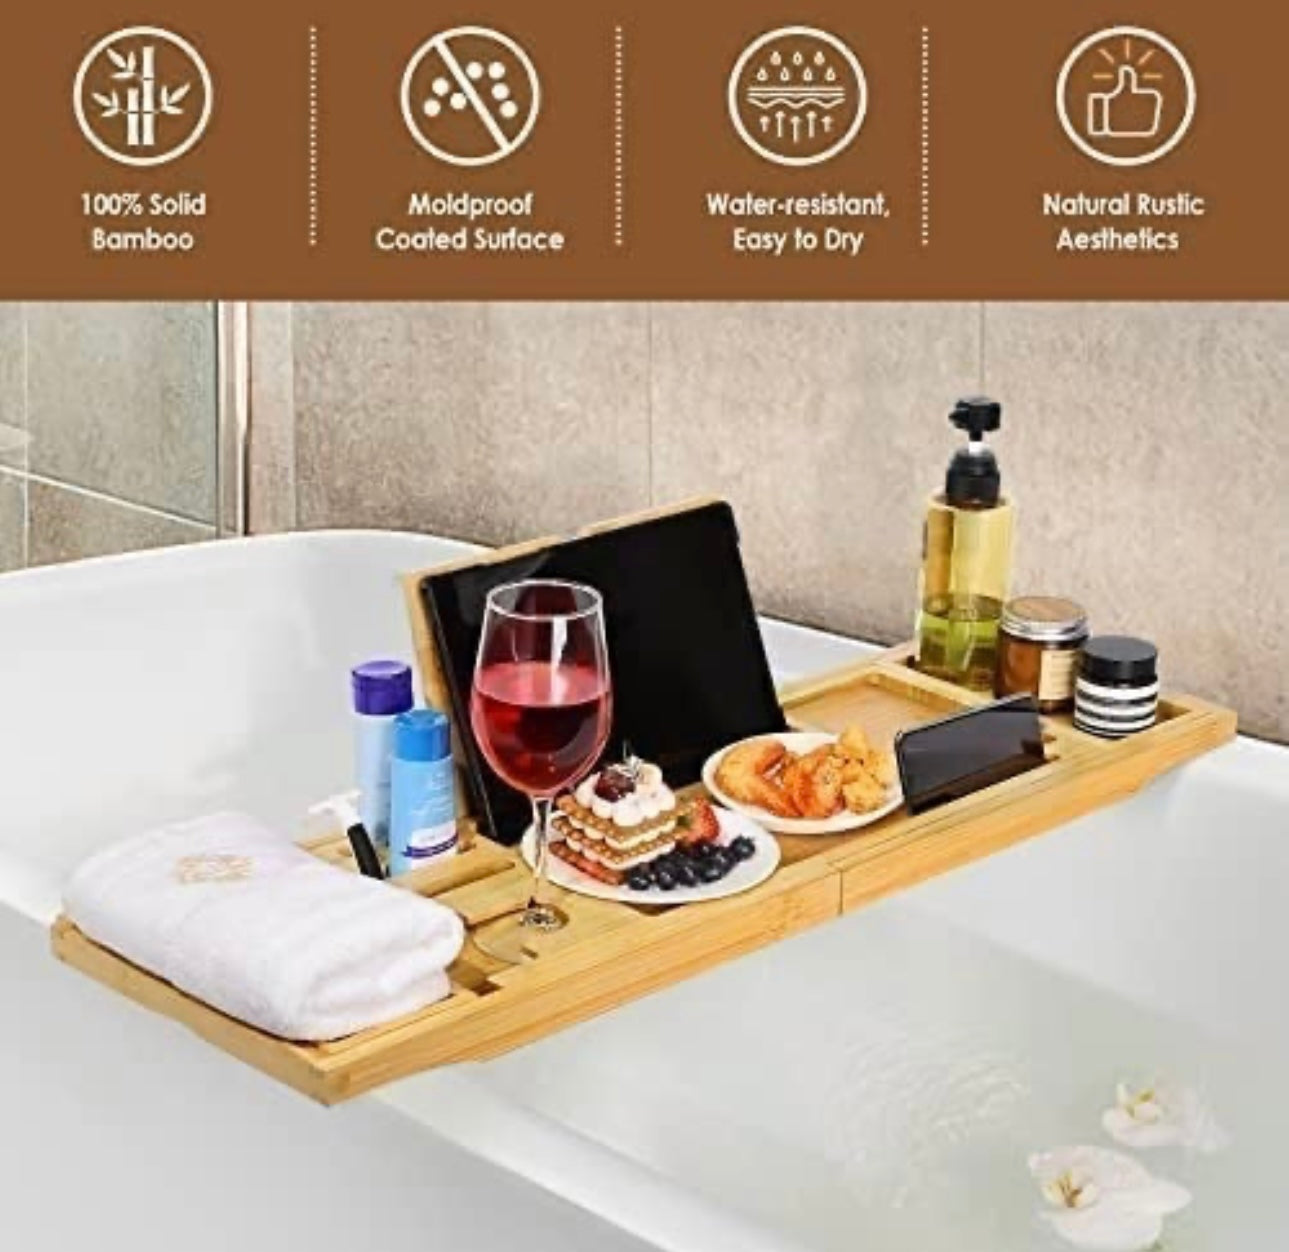 Bathtub Expandable Bamboo Tray, with Book Holder,Soap Dish, Wine Glass Slot